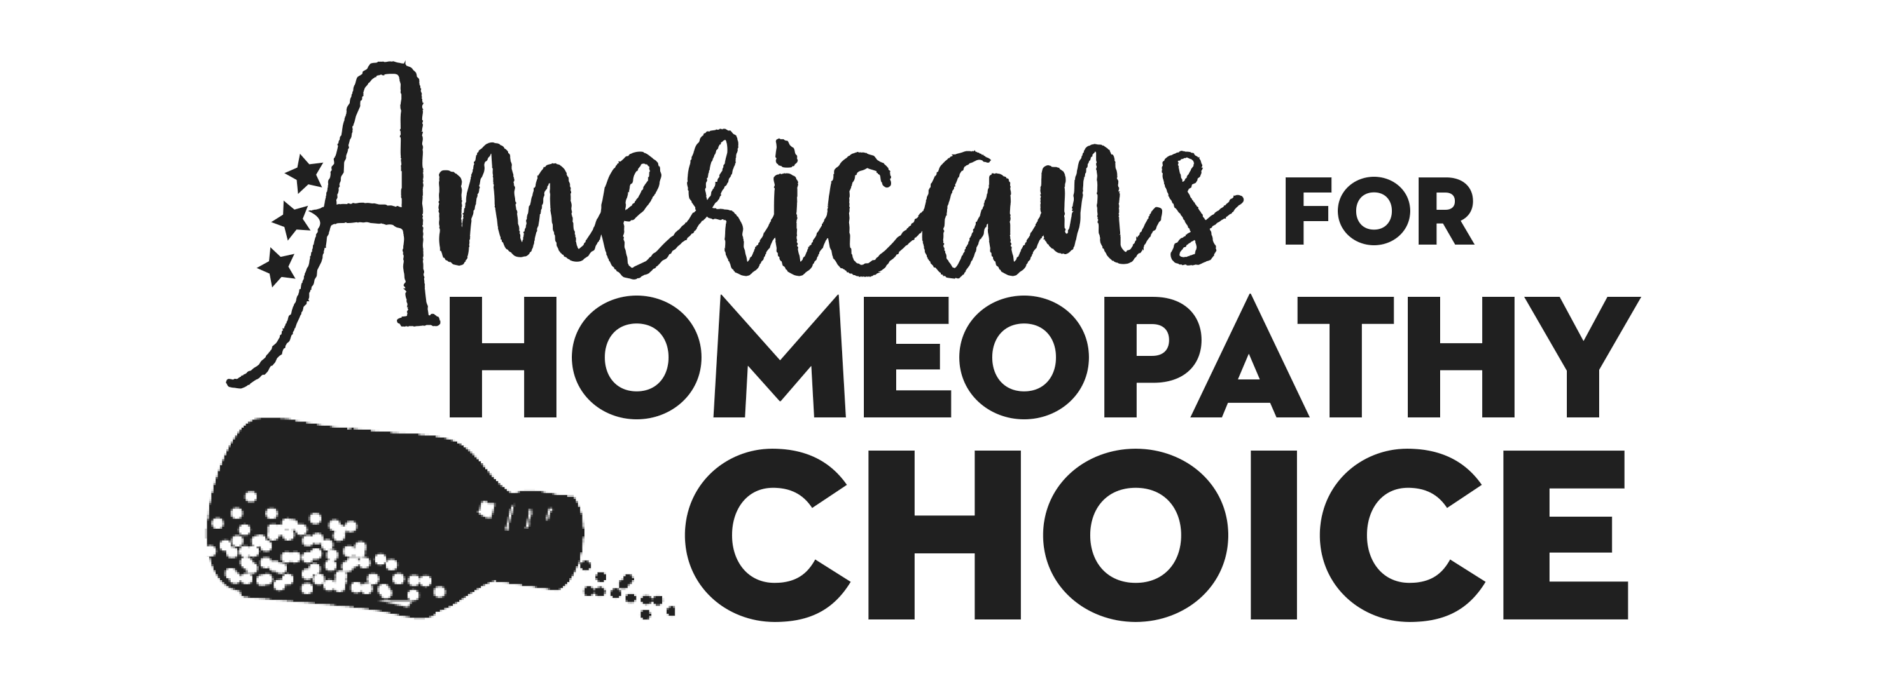 Americans for homeopathy choice logo